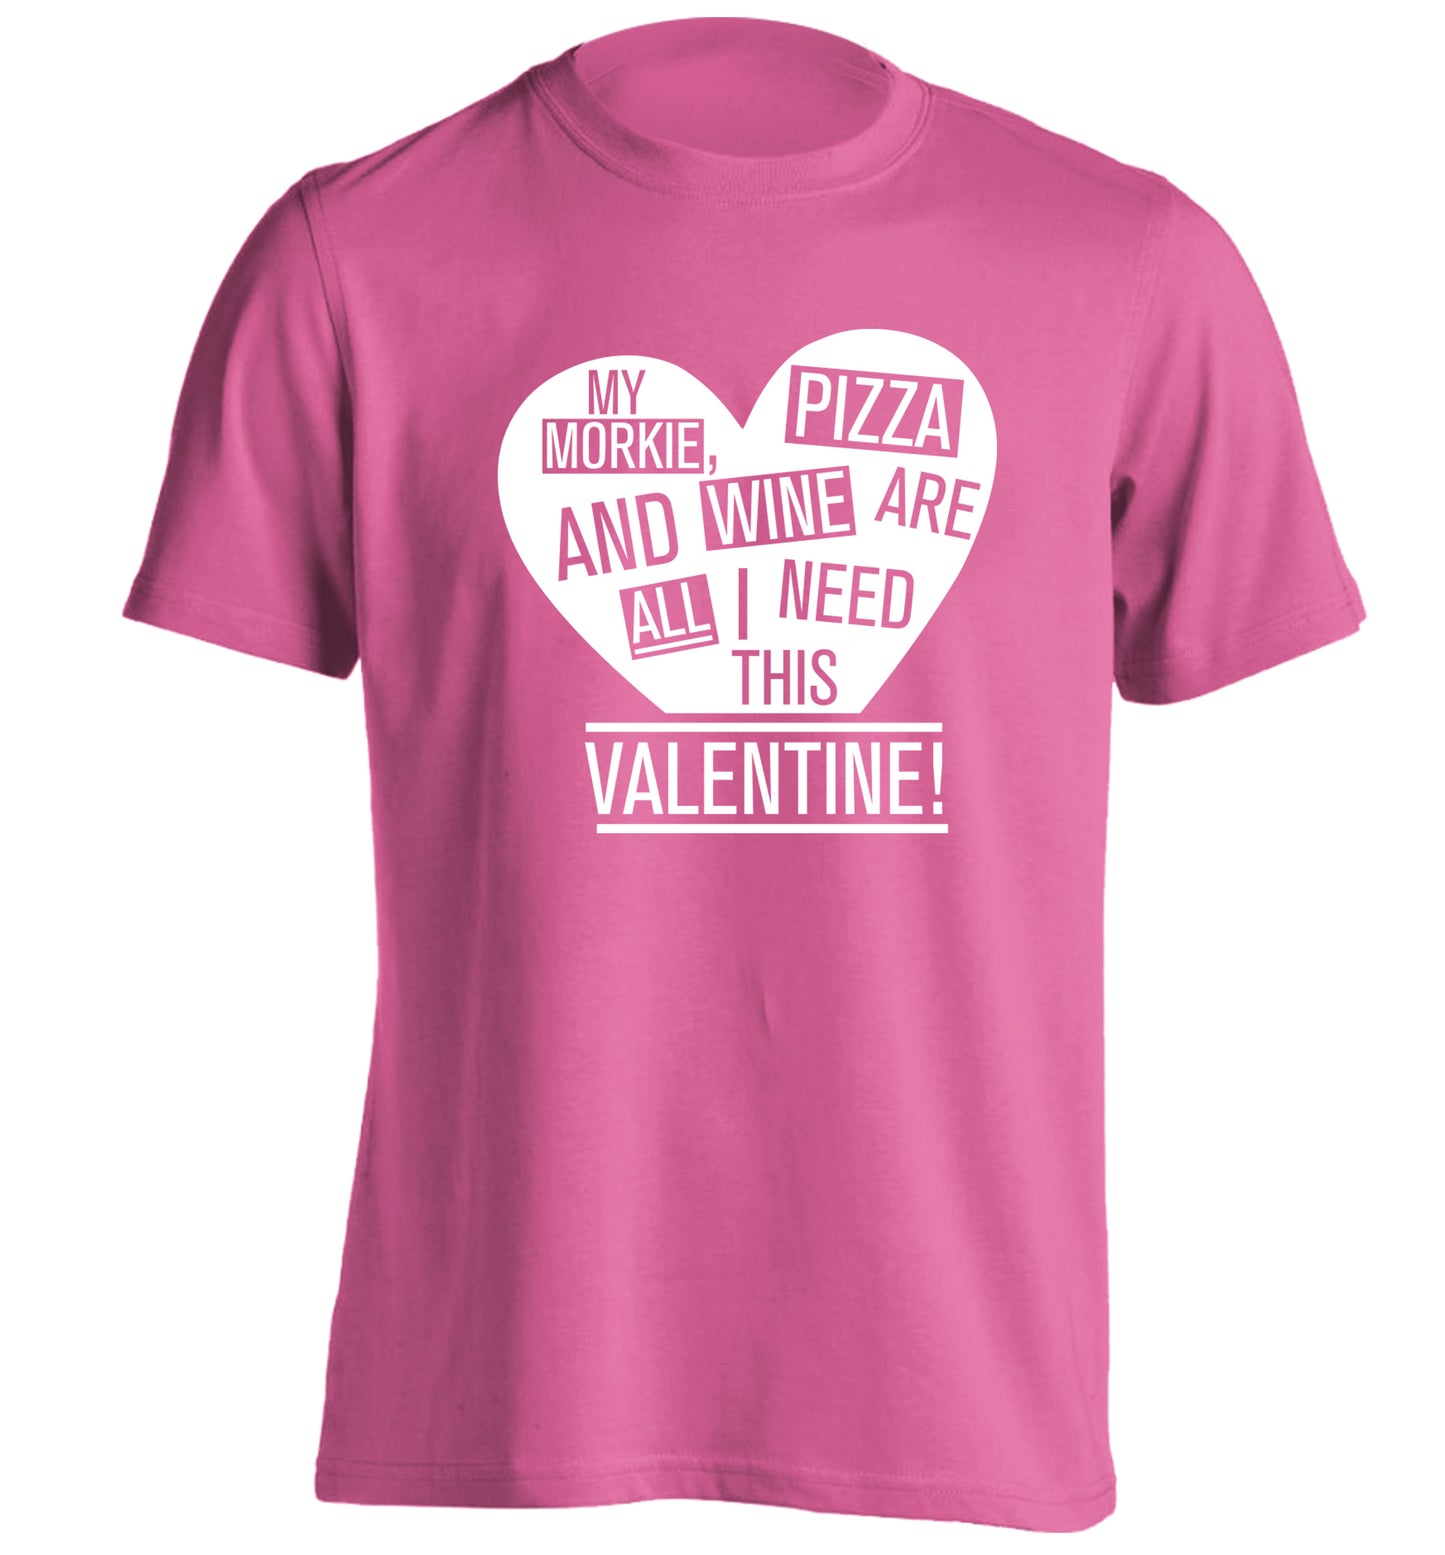 My morkie, pizza and wine are all I need this valentine! adults unisex pink Tshirt 2XL